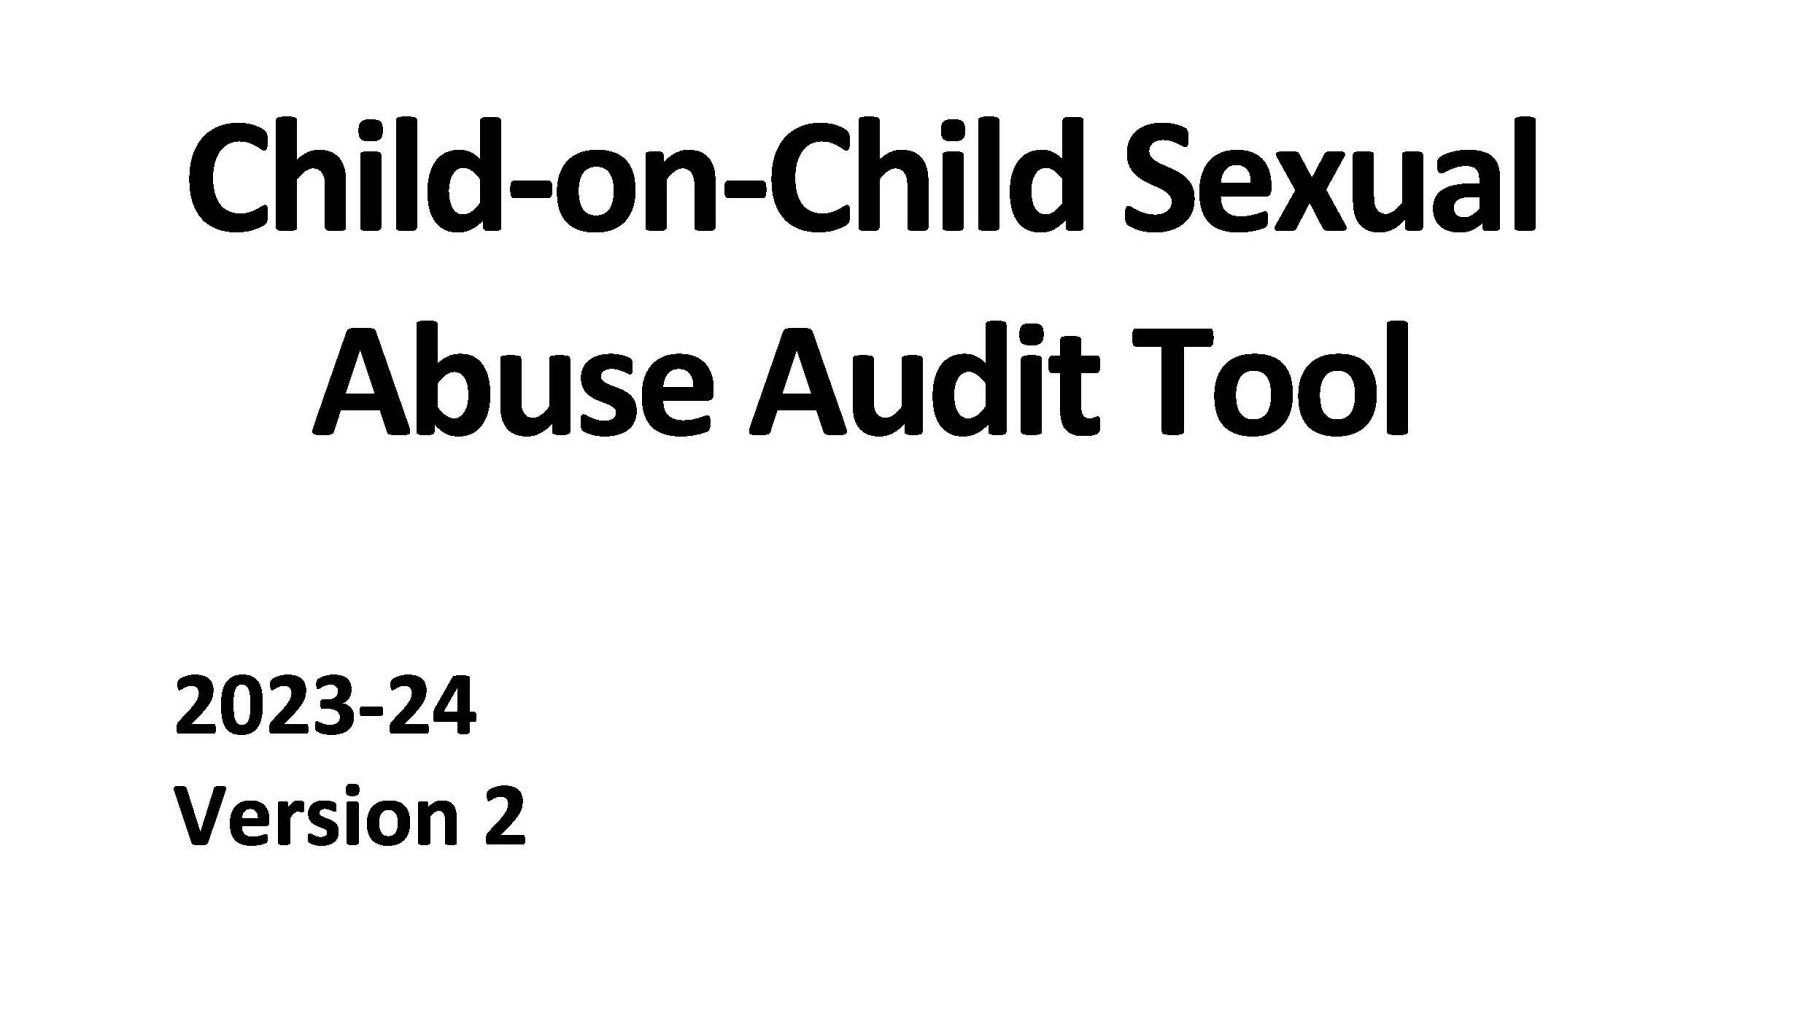 Child on child sexual abuse evaluate your own school